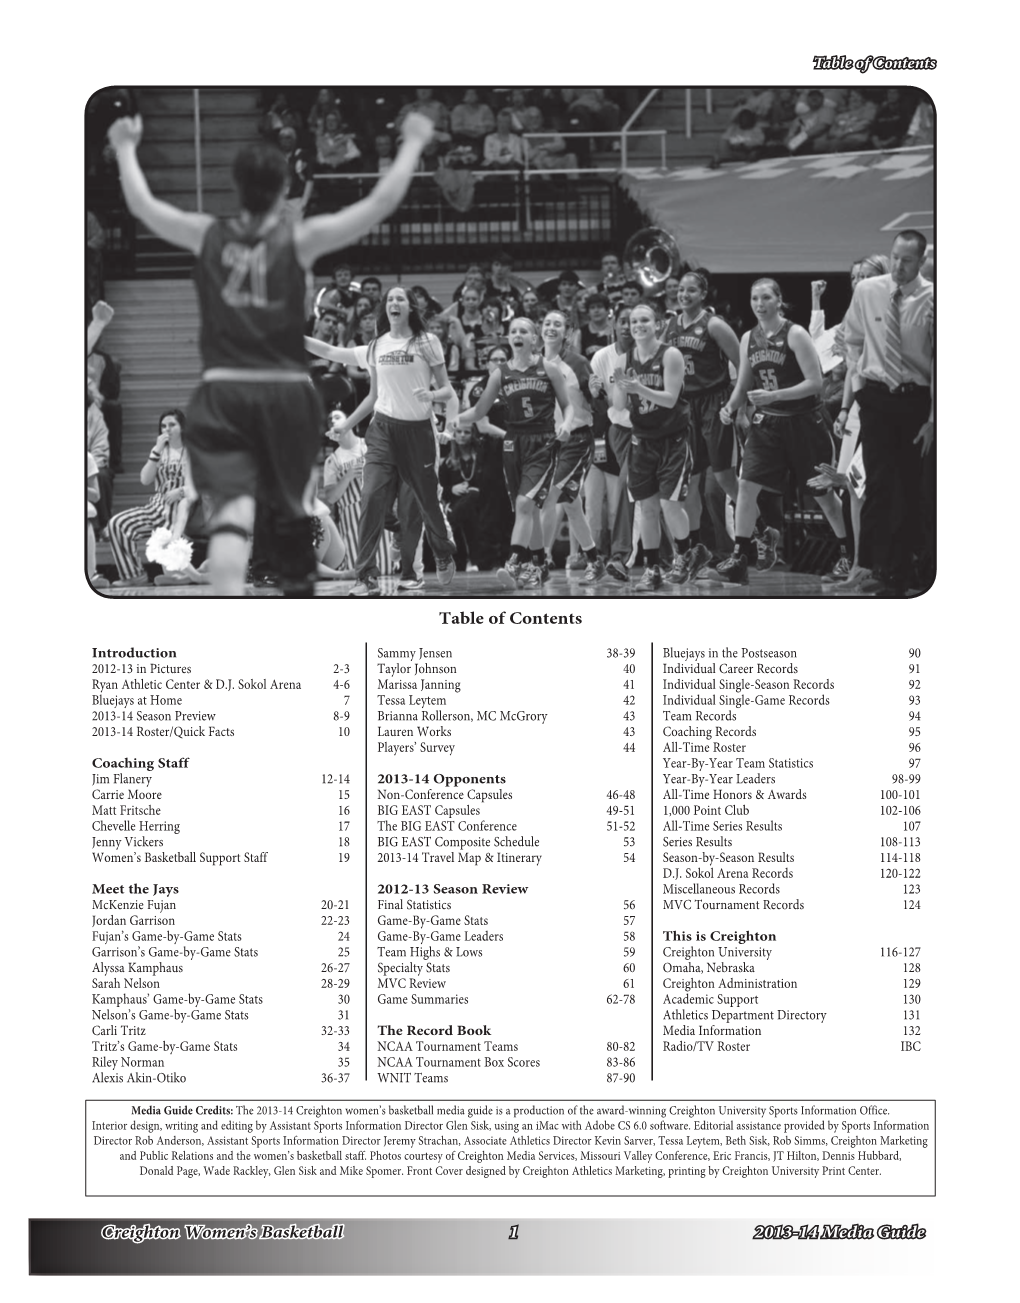 Creighton Women's Basketball 1 2013-14 Media Guide Table of Contents